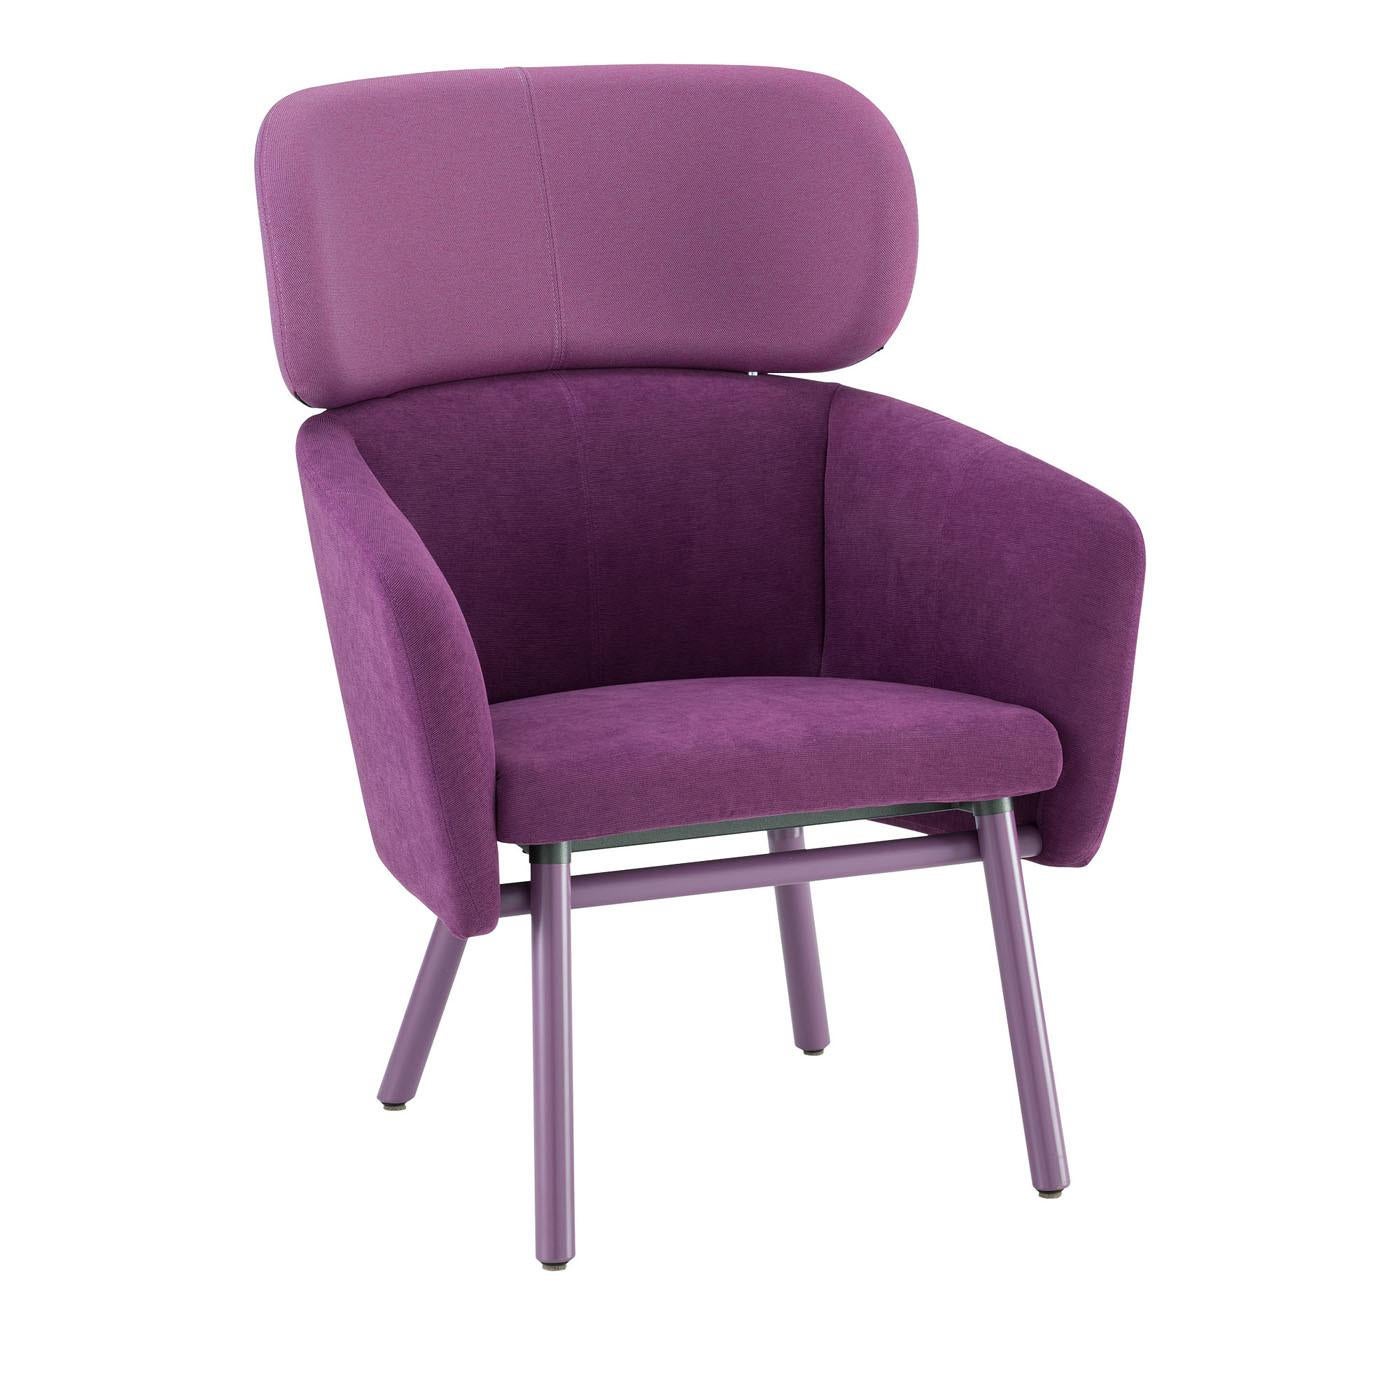 Italian Balù Extra Large Lilac Chair by Emilio Nanni For Sale